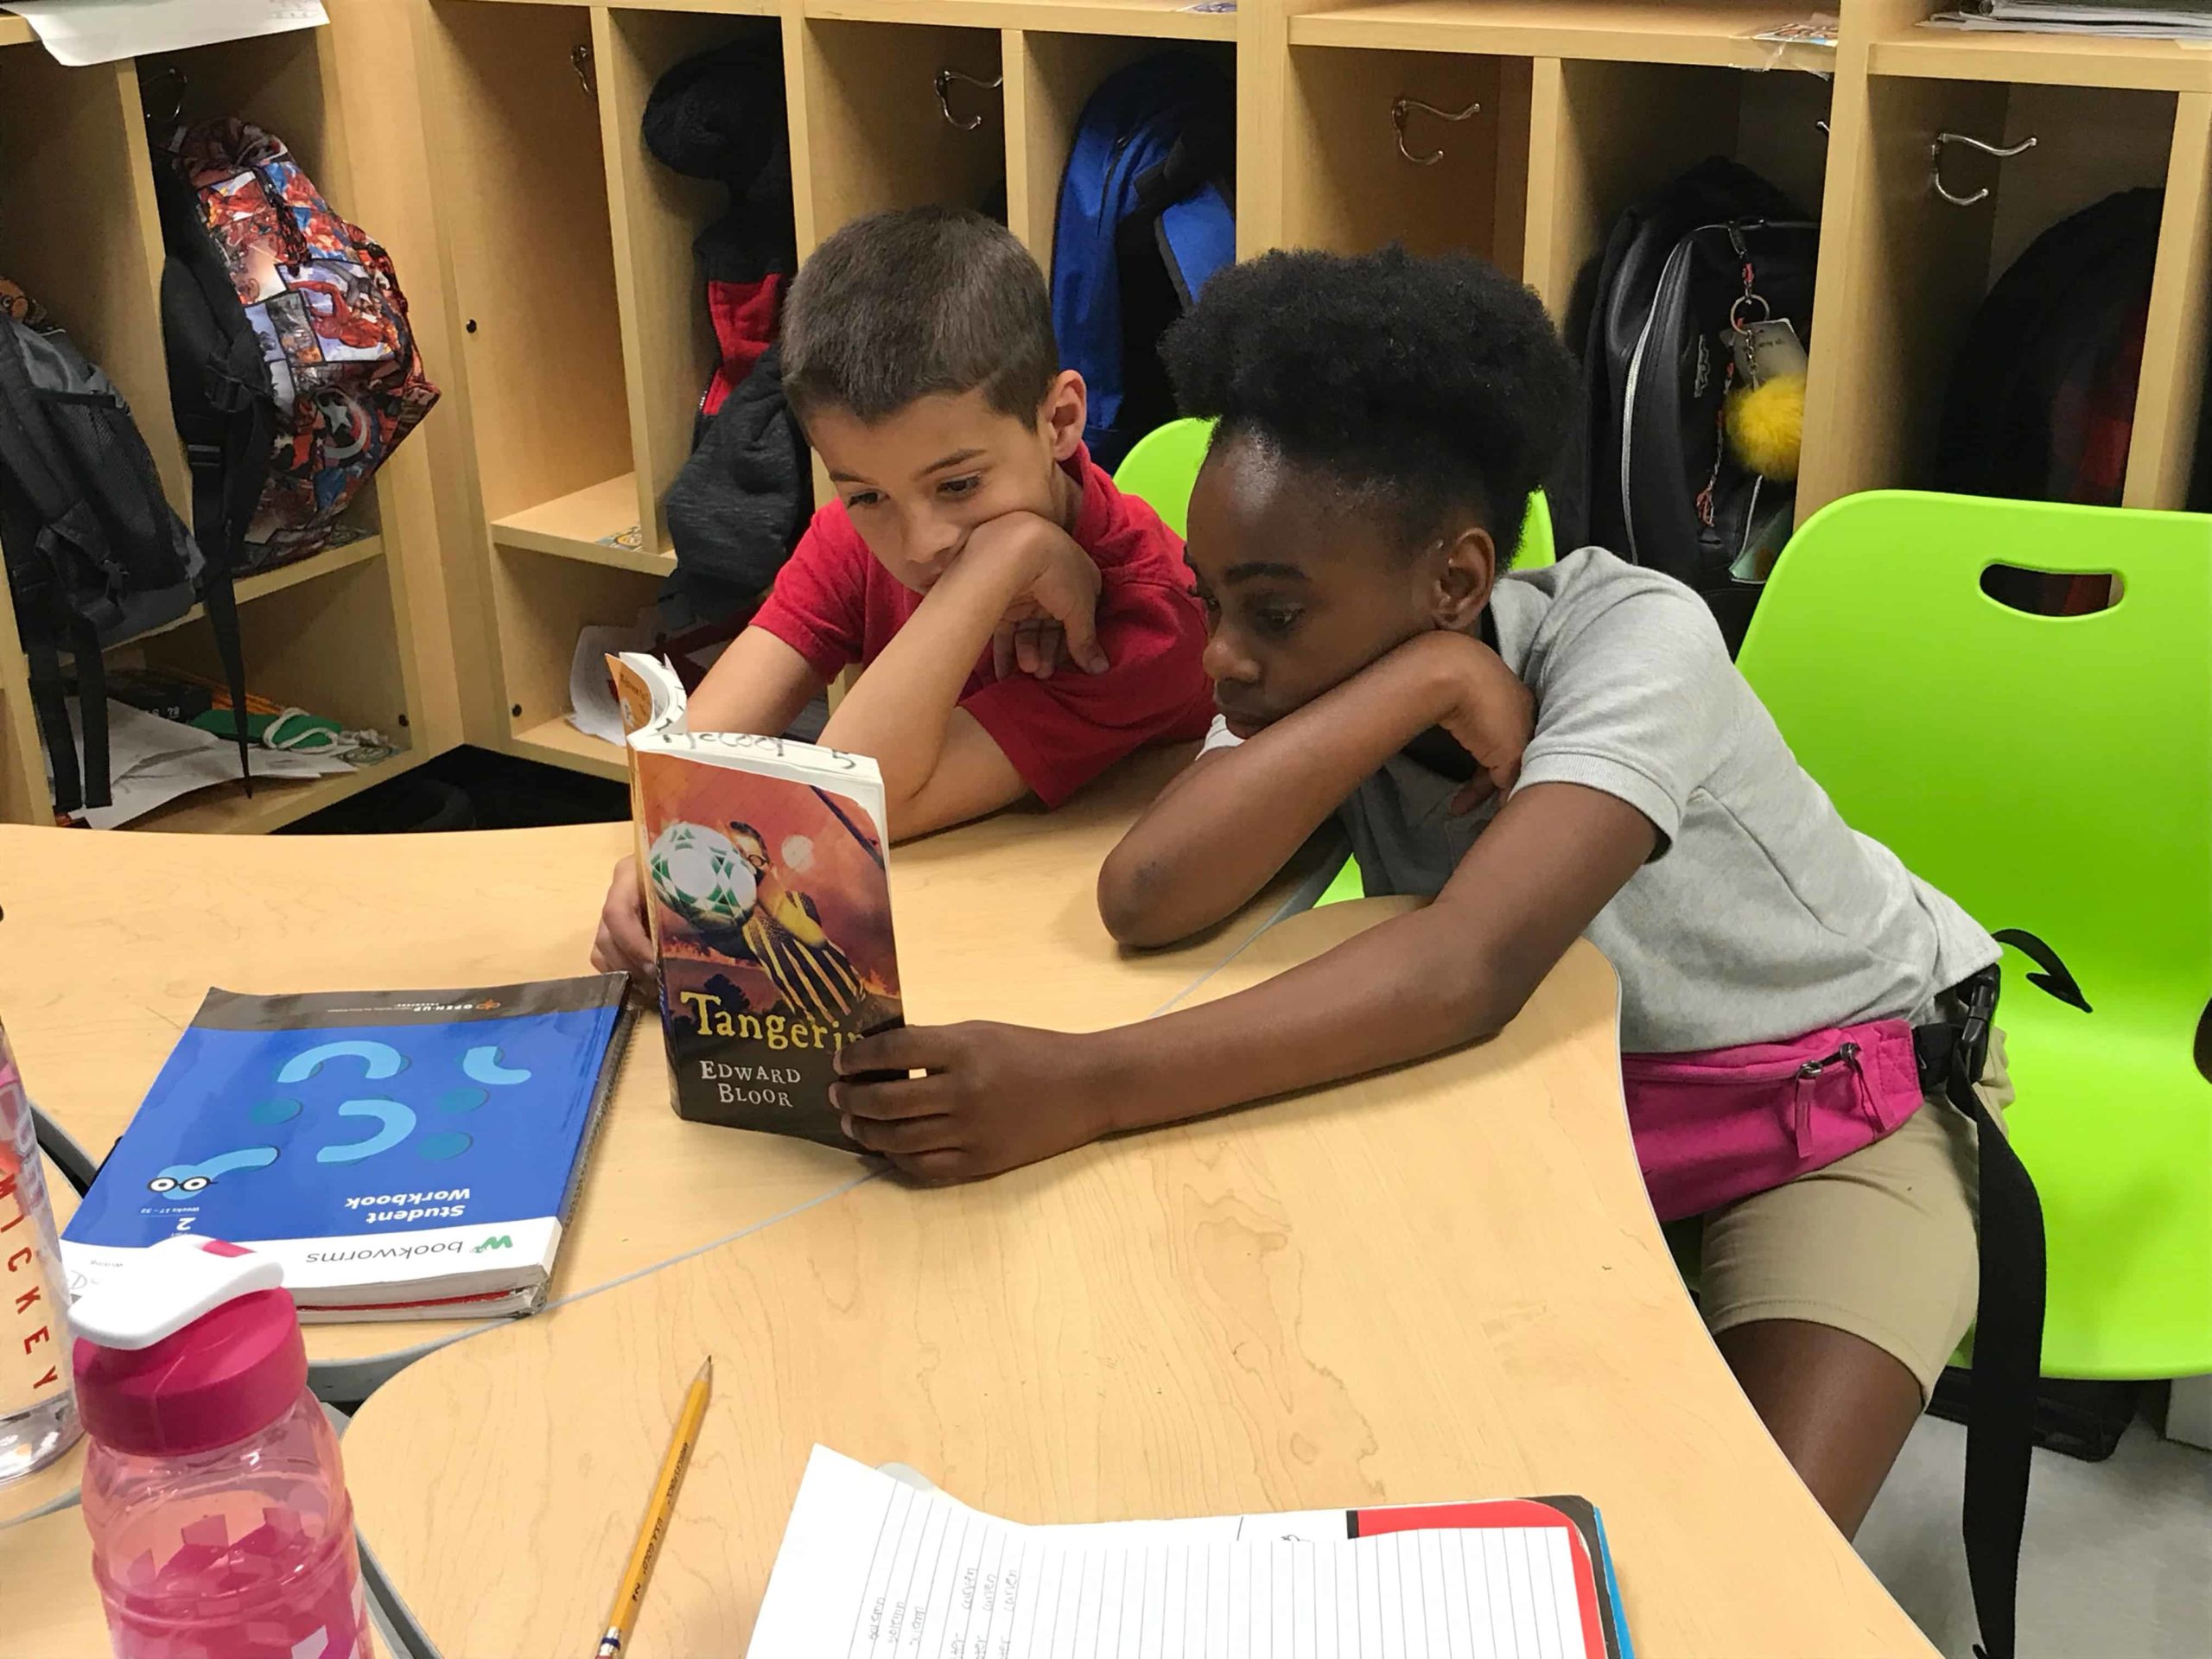 Students read a book together